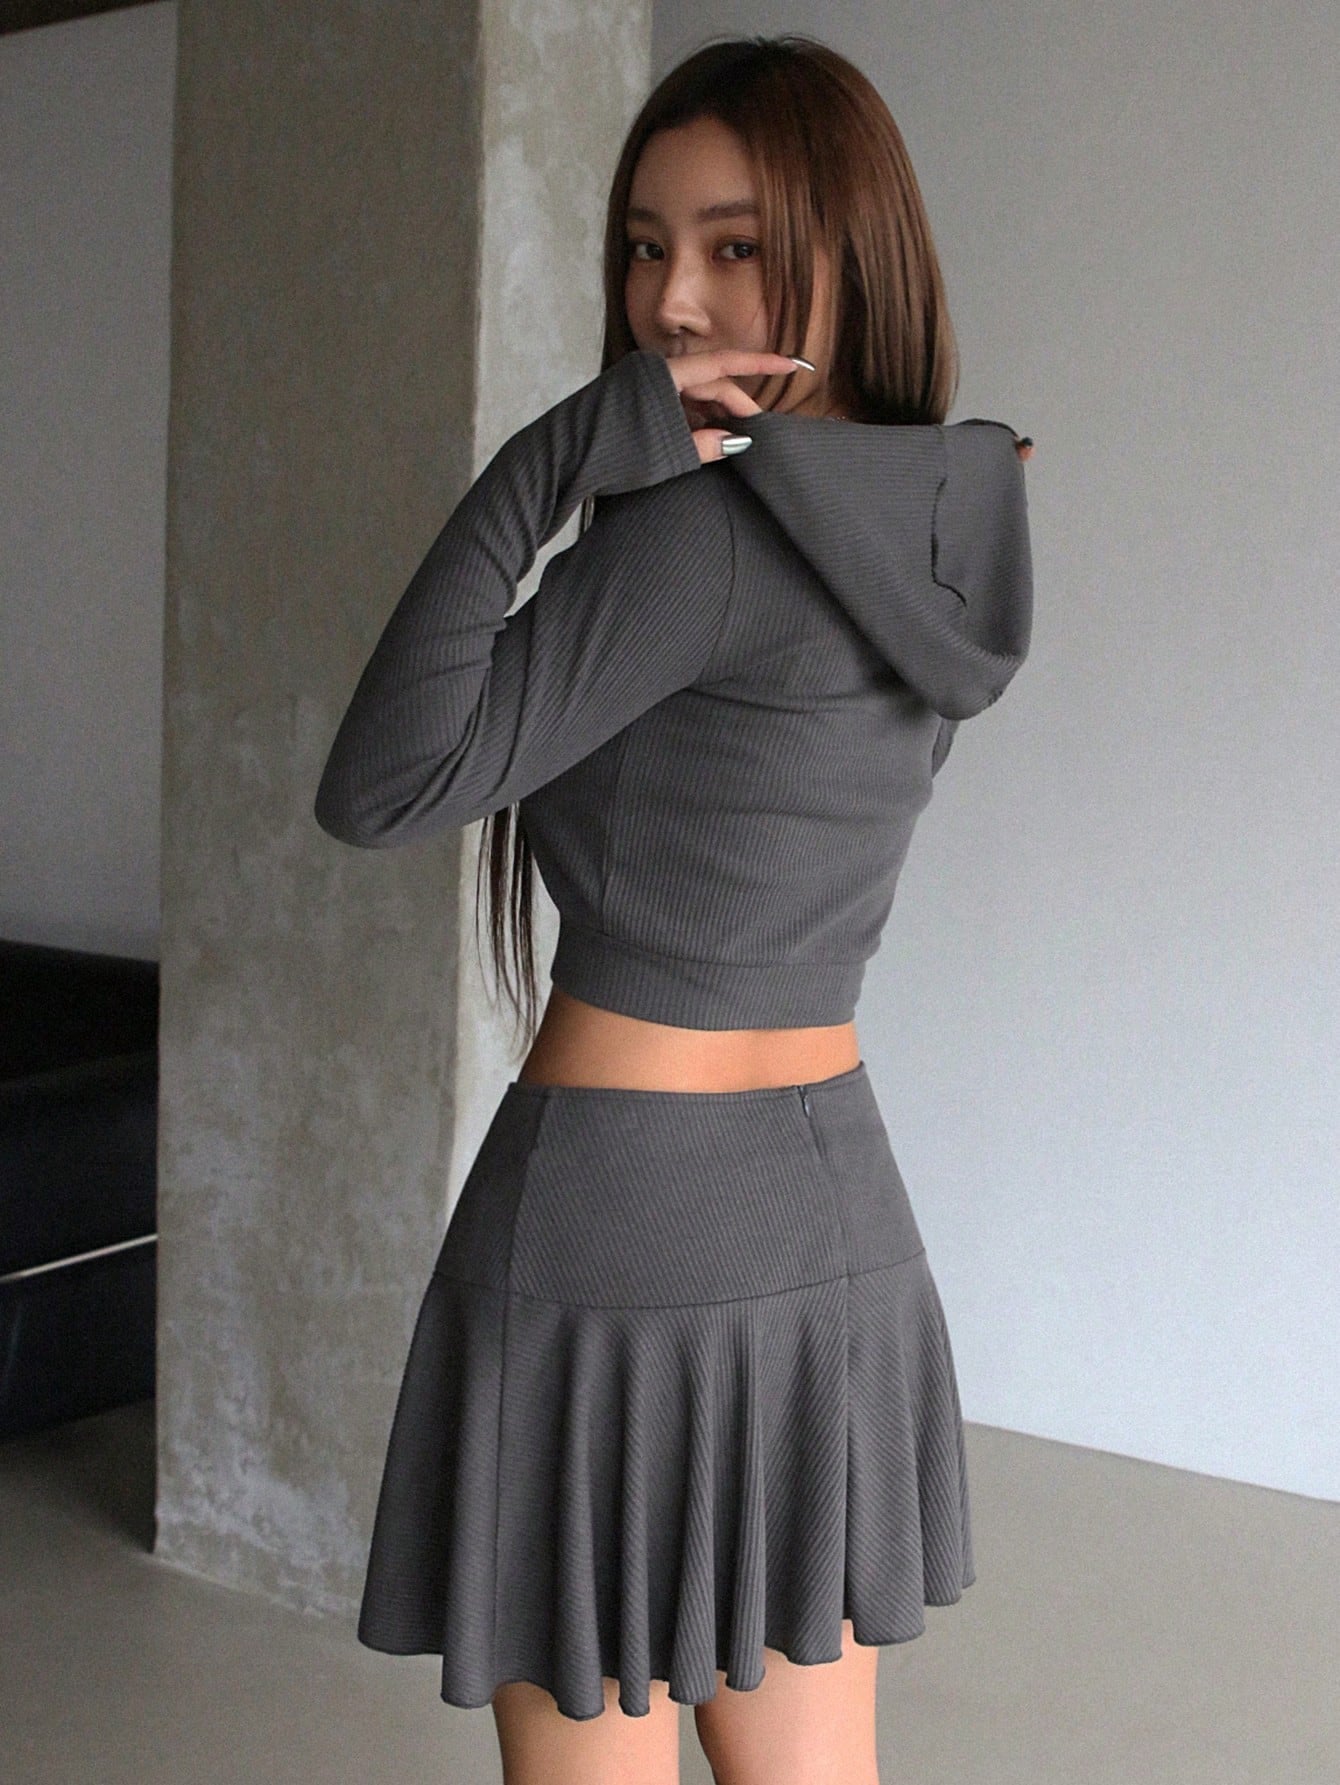 Solid Color Zipper Front Hooded Sweatshirt And Skirt With Drawstring